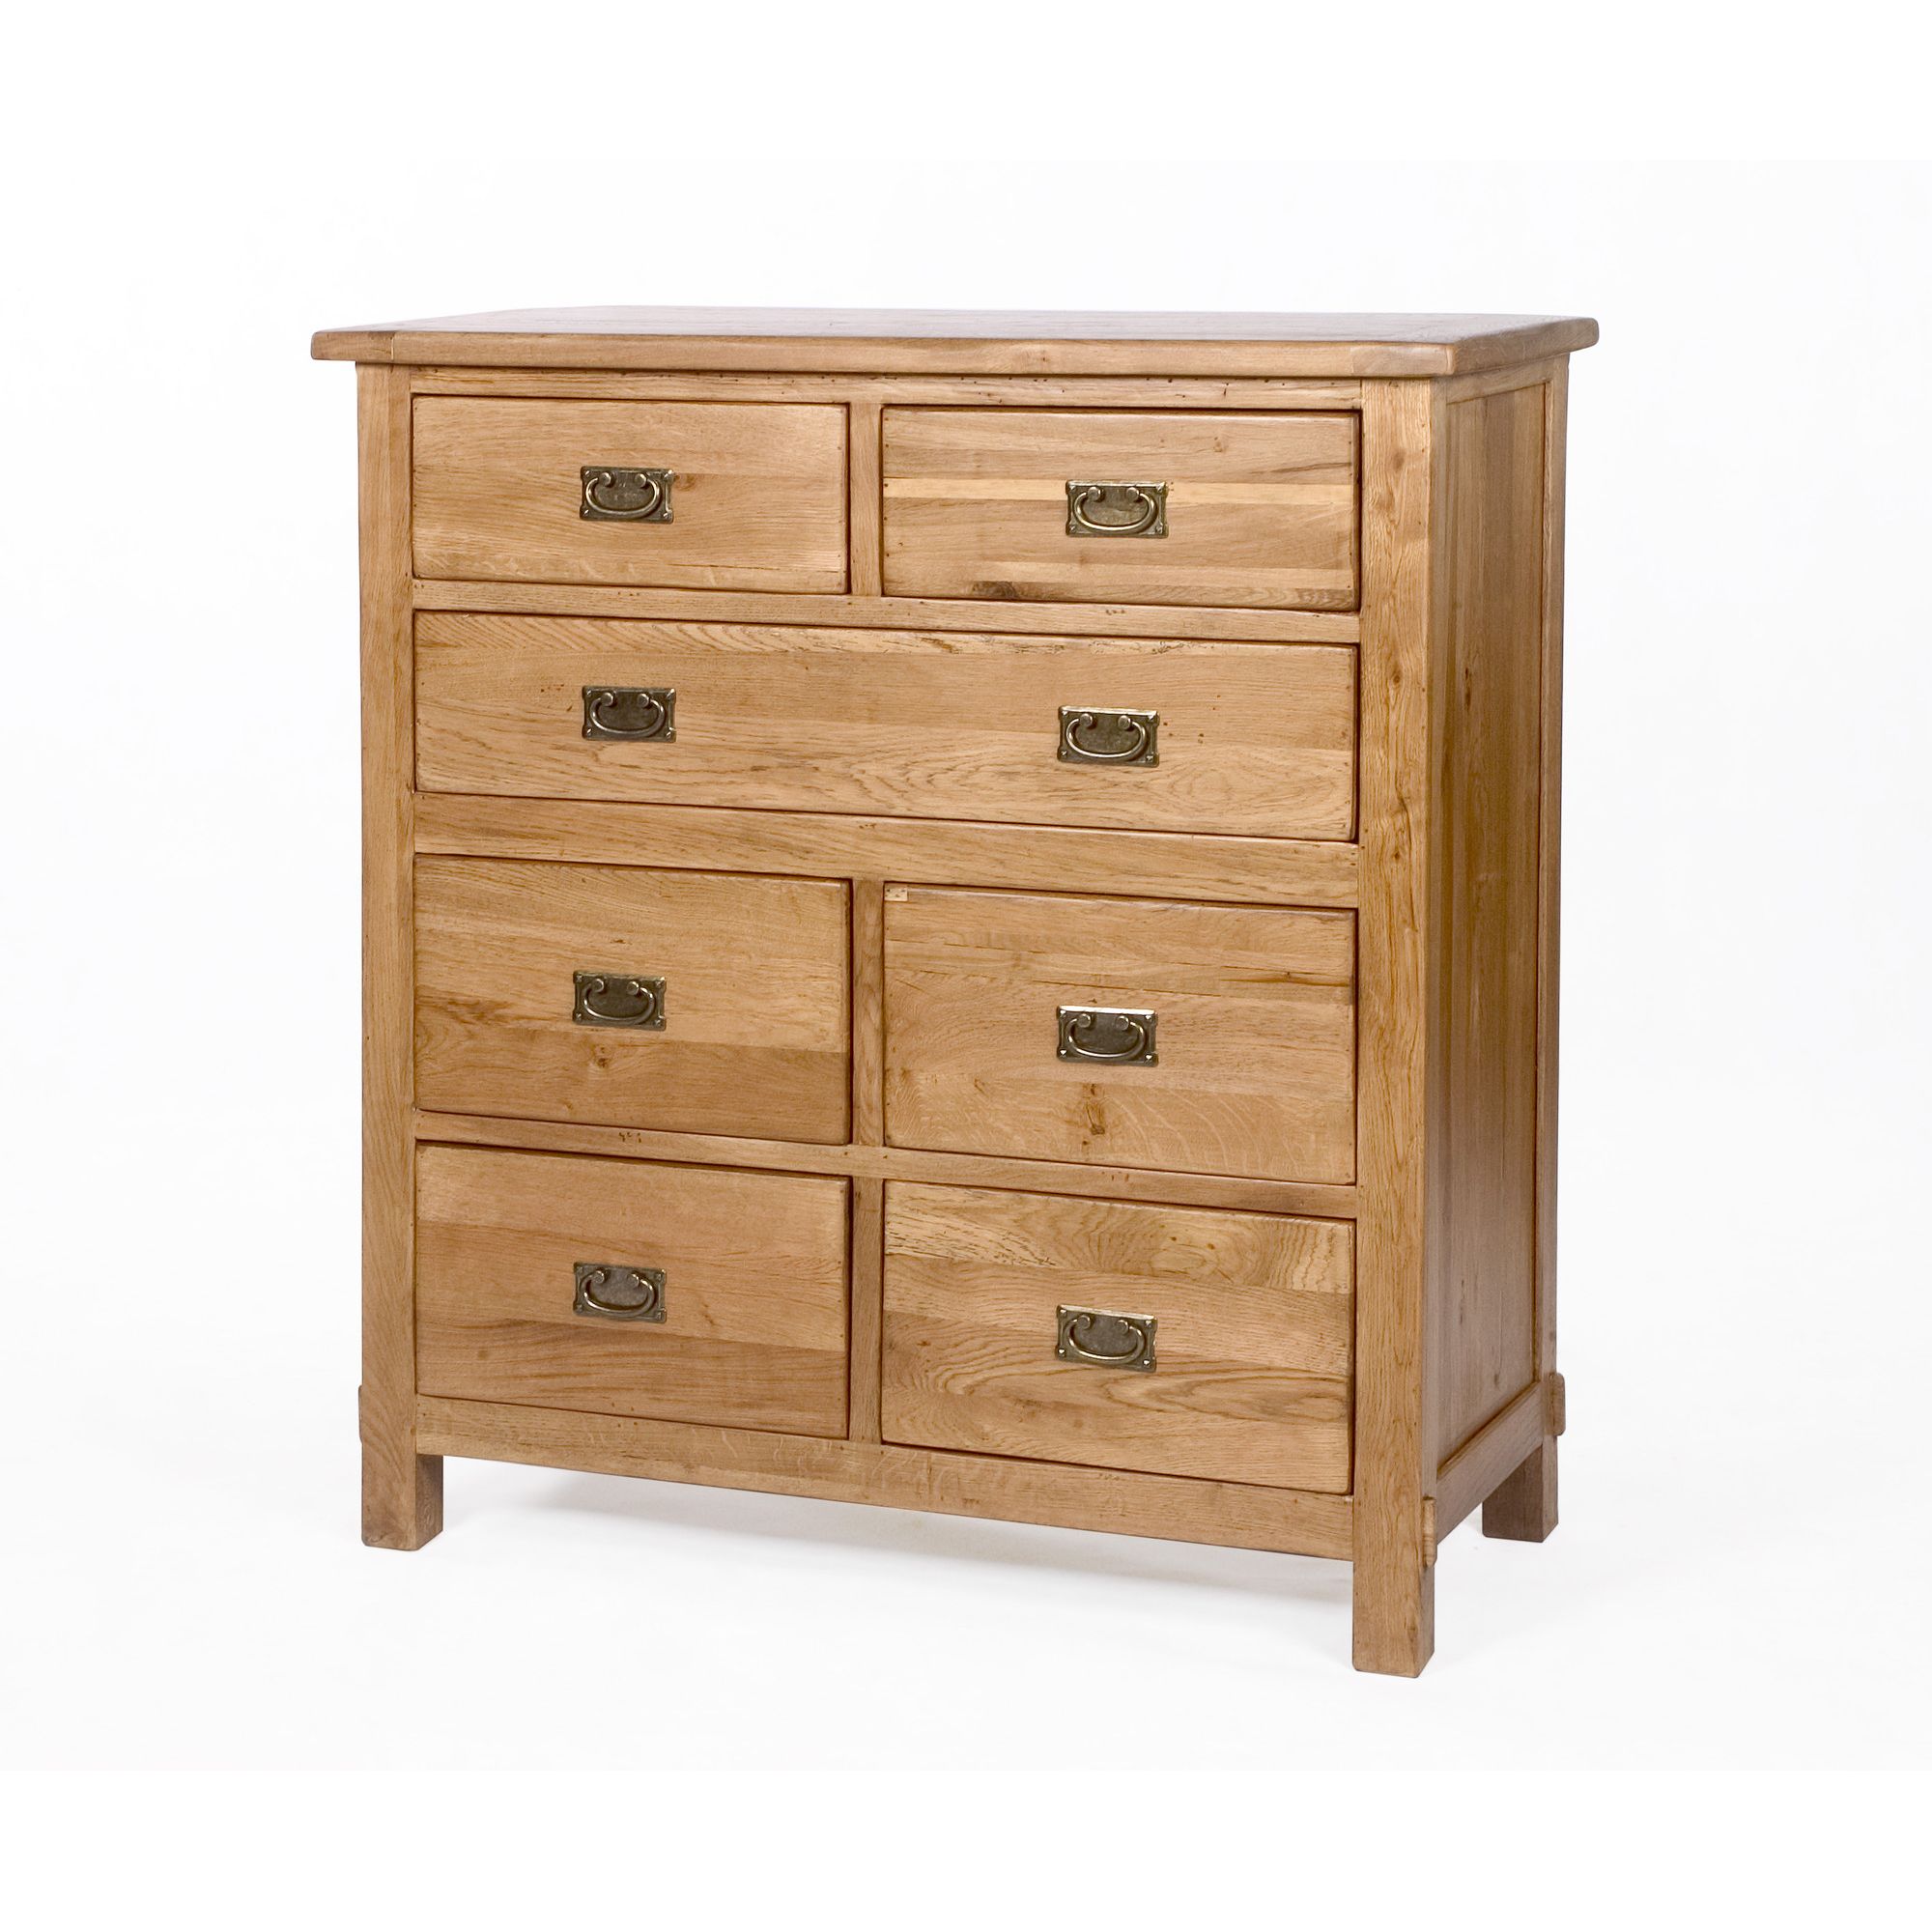 Wiseaction Riviera Chest of 7 Drawers at Tesco Direct